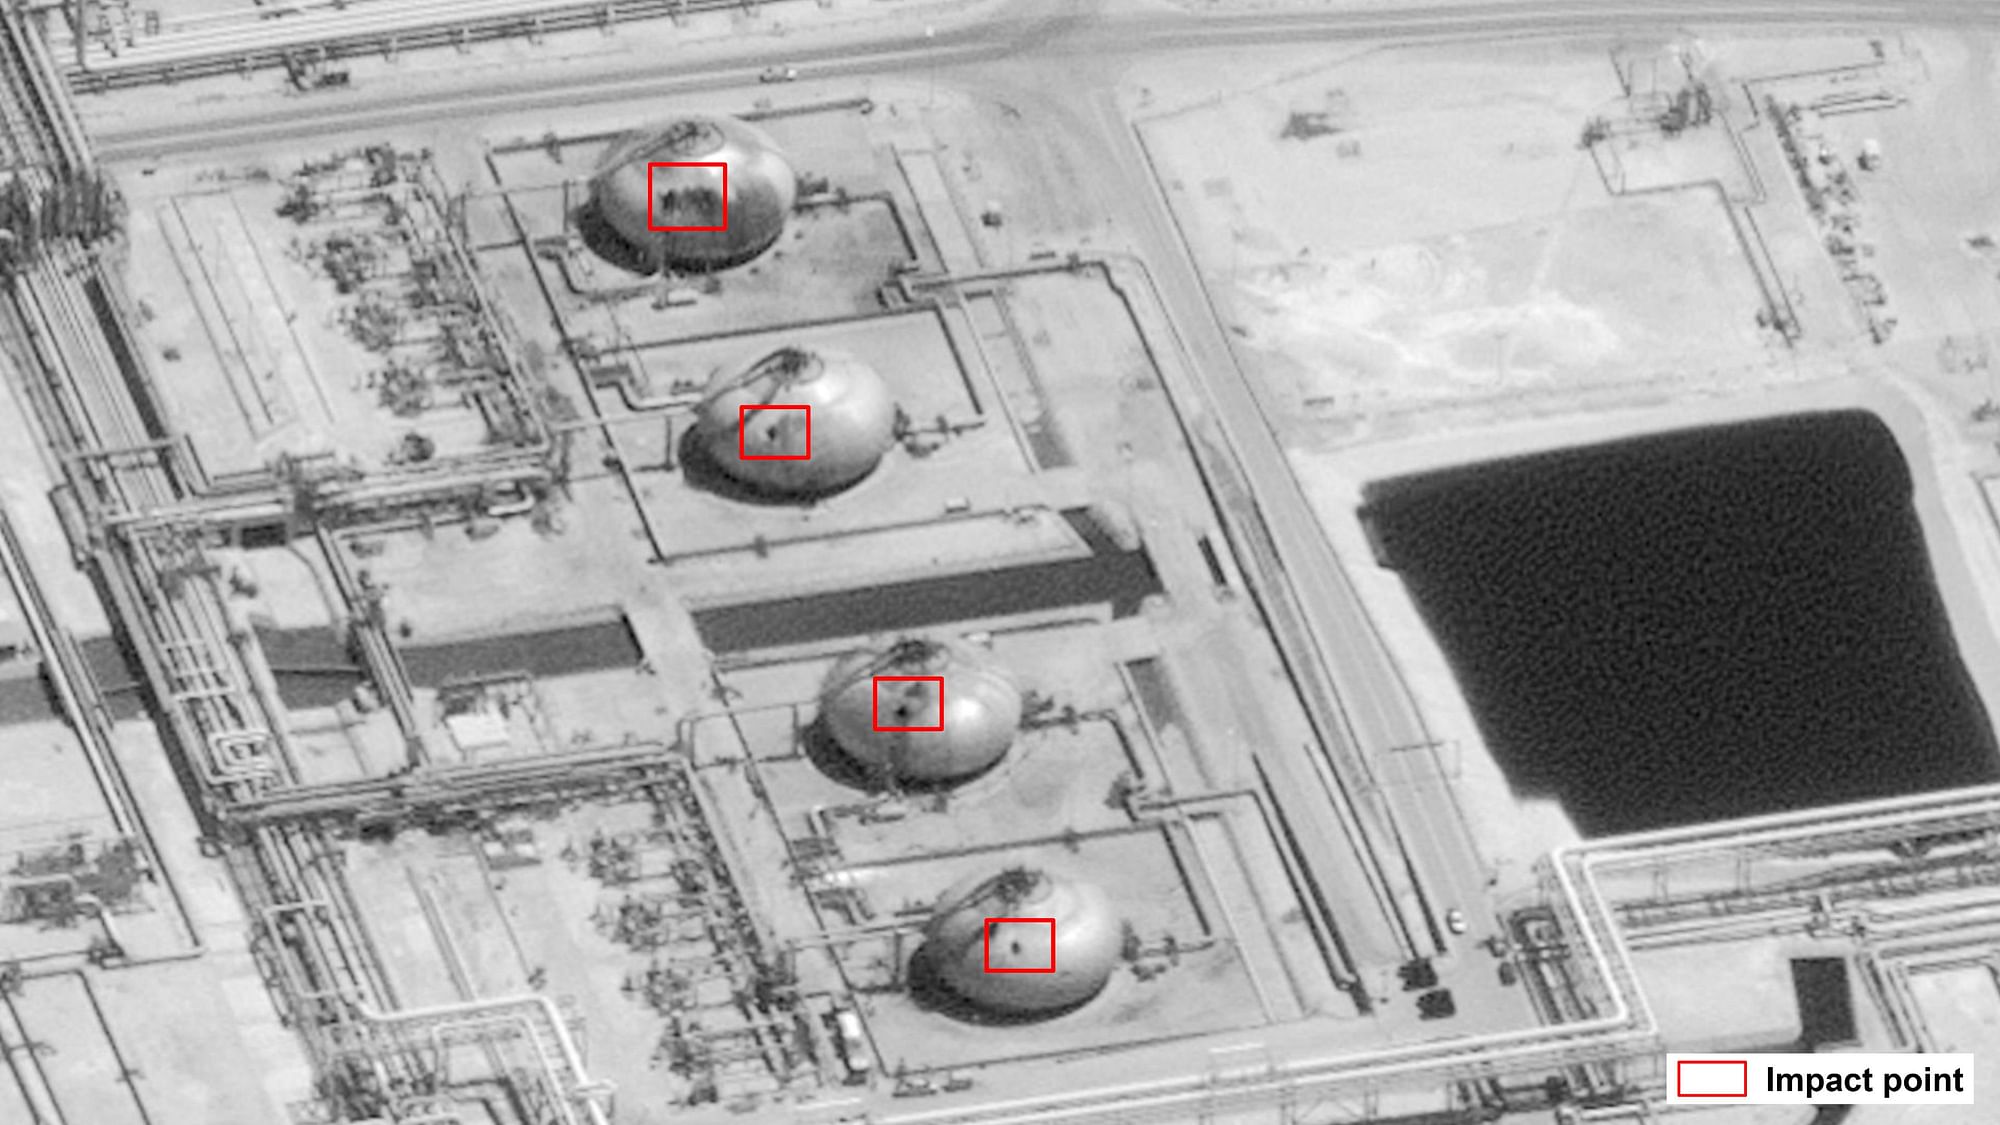 Image provided by the US government and DigitalGlobe  shows damage to  Saudi Aramco’s Abaqaiq oil processing facility in Buqyaq.&nbsp;